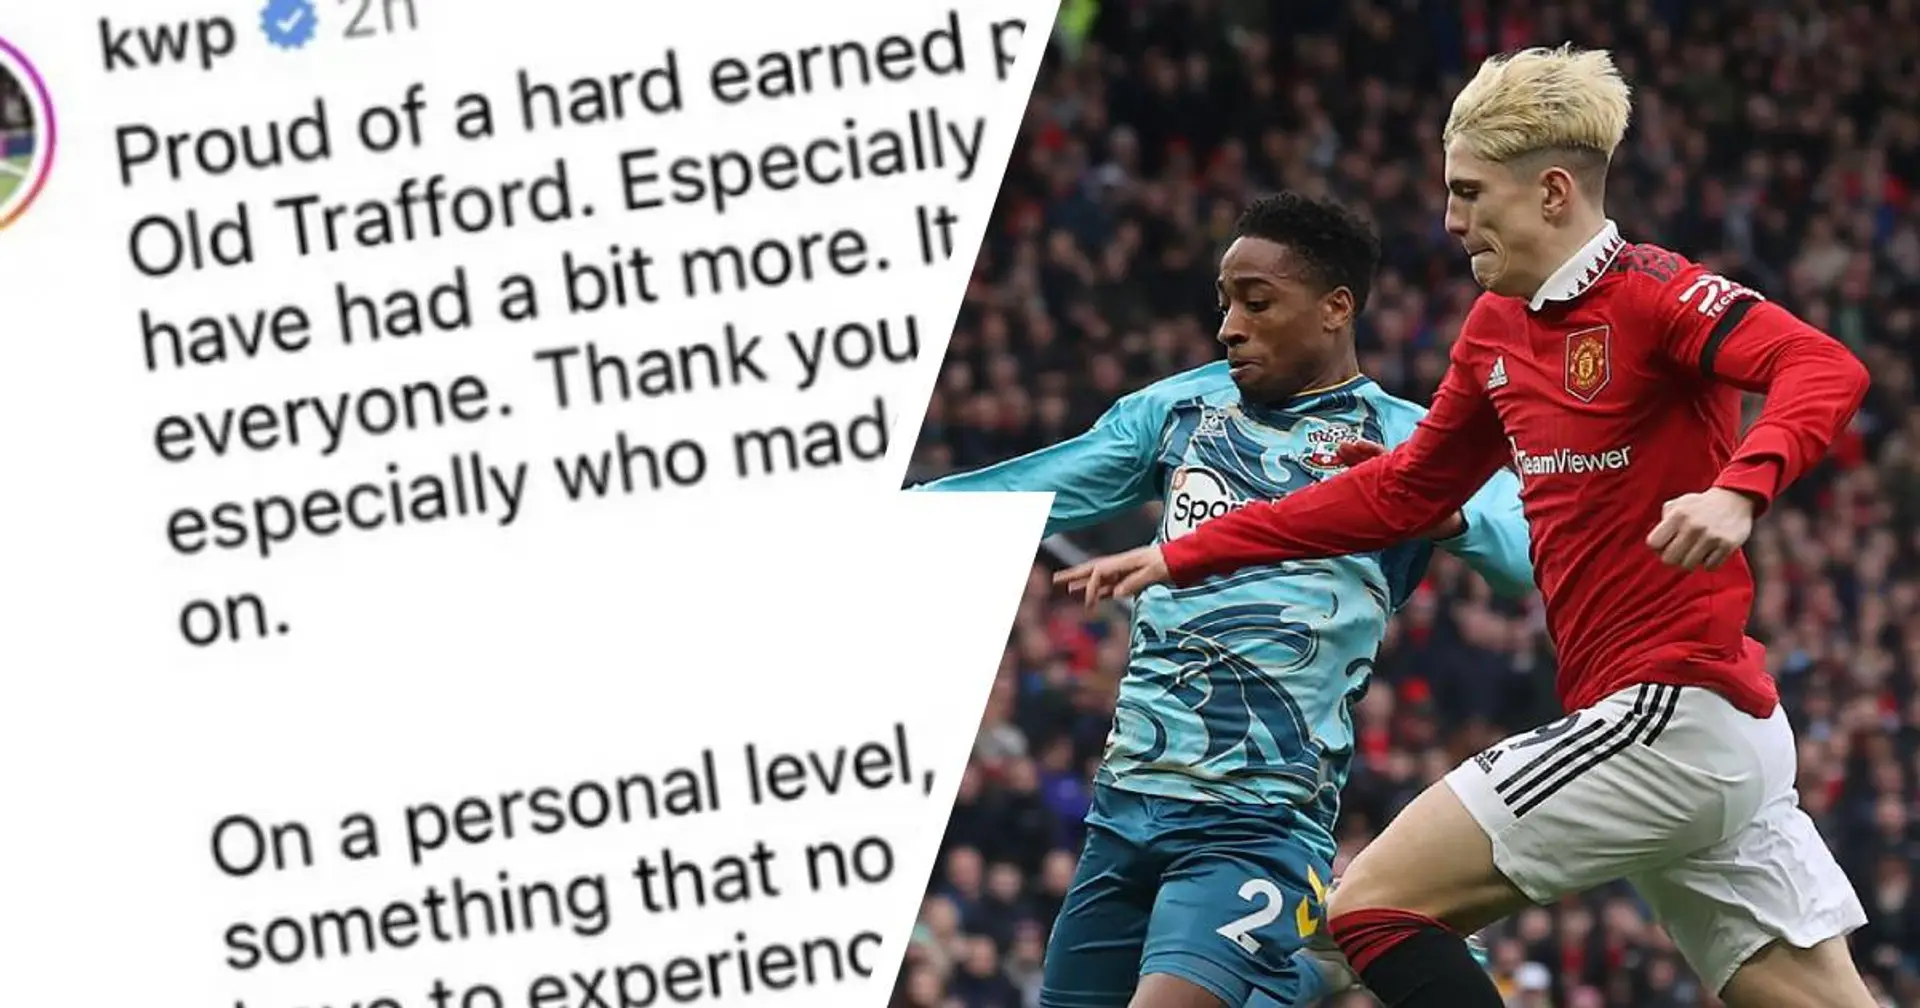 Kyle Walker-Peters receives support from Garnacho after racial abuse at Old Trafford